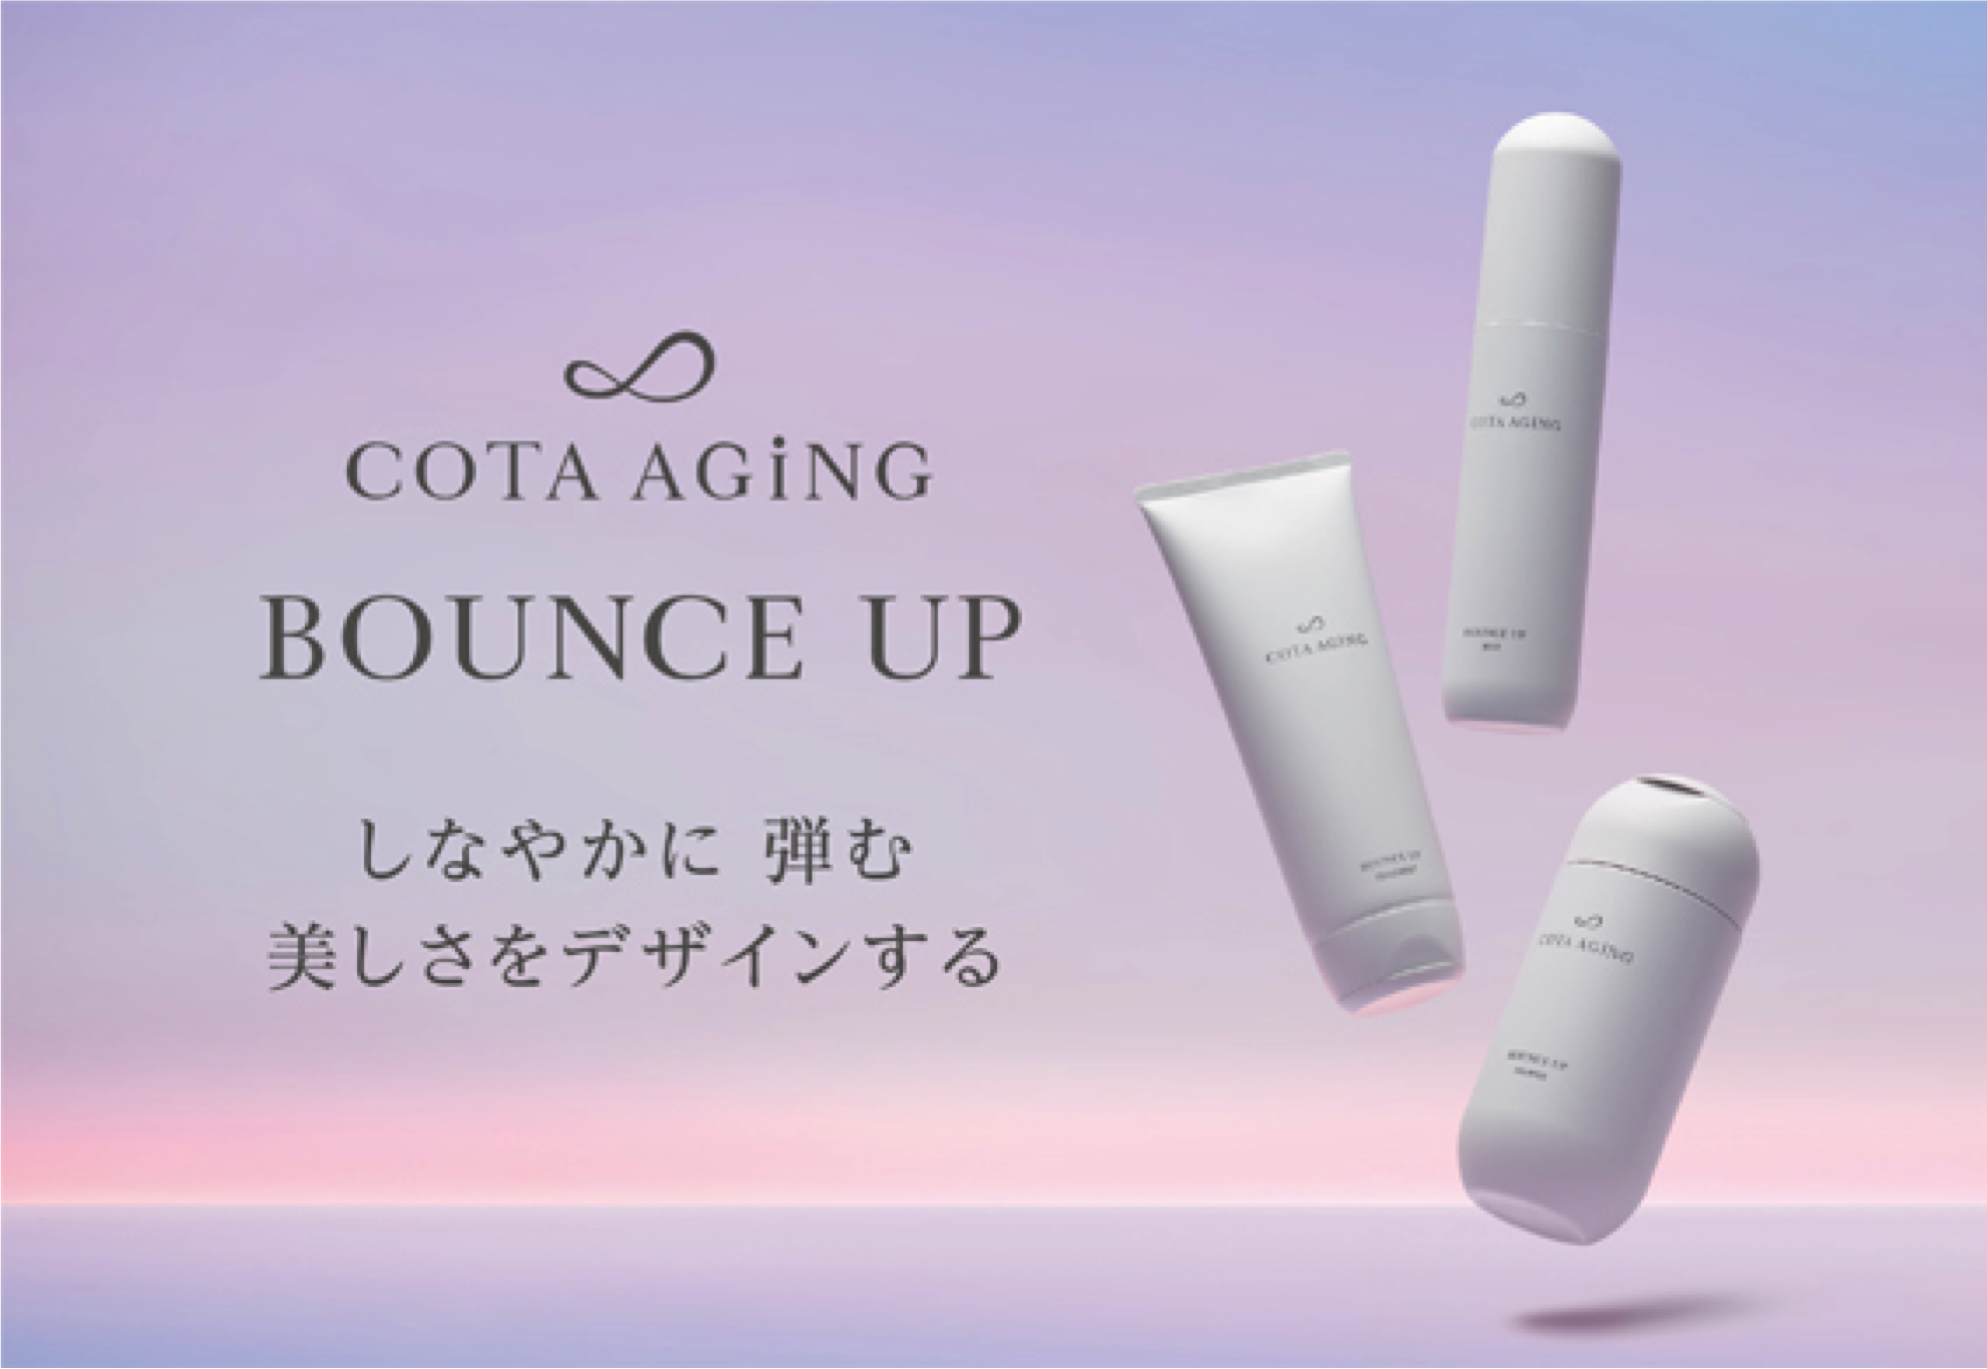 COTA AGiNG BOUNCE UP